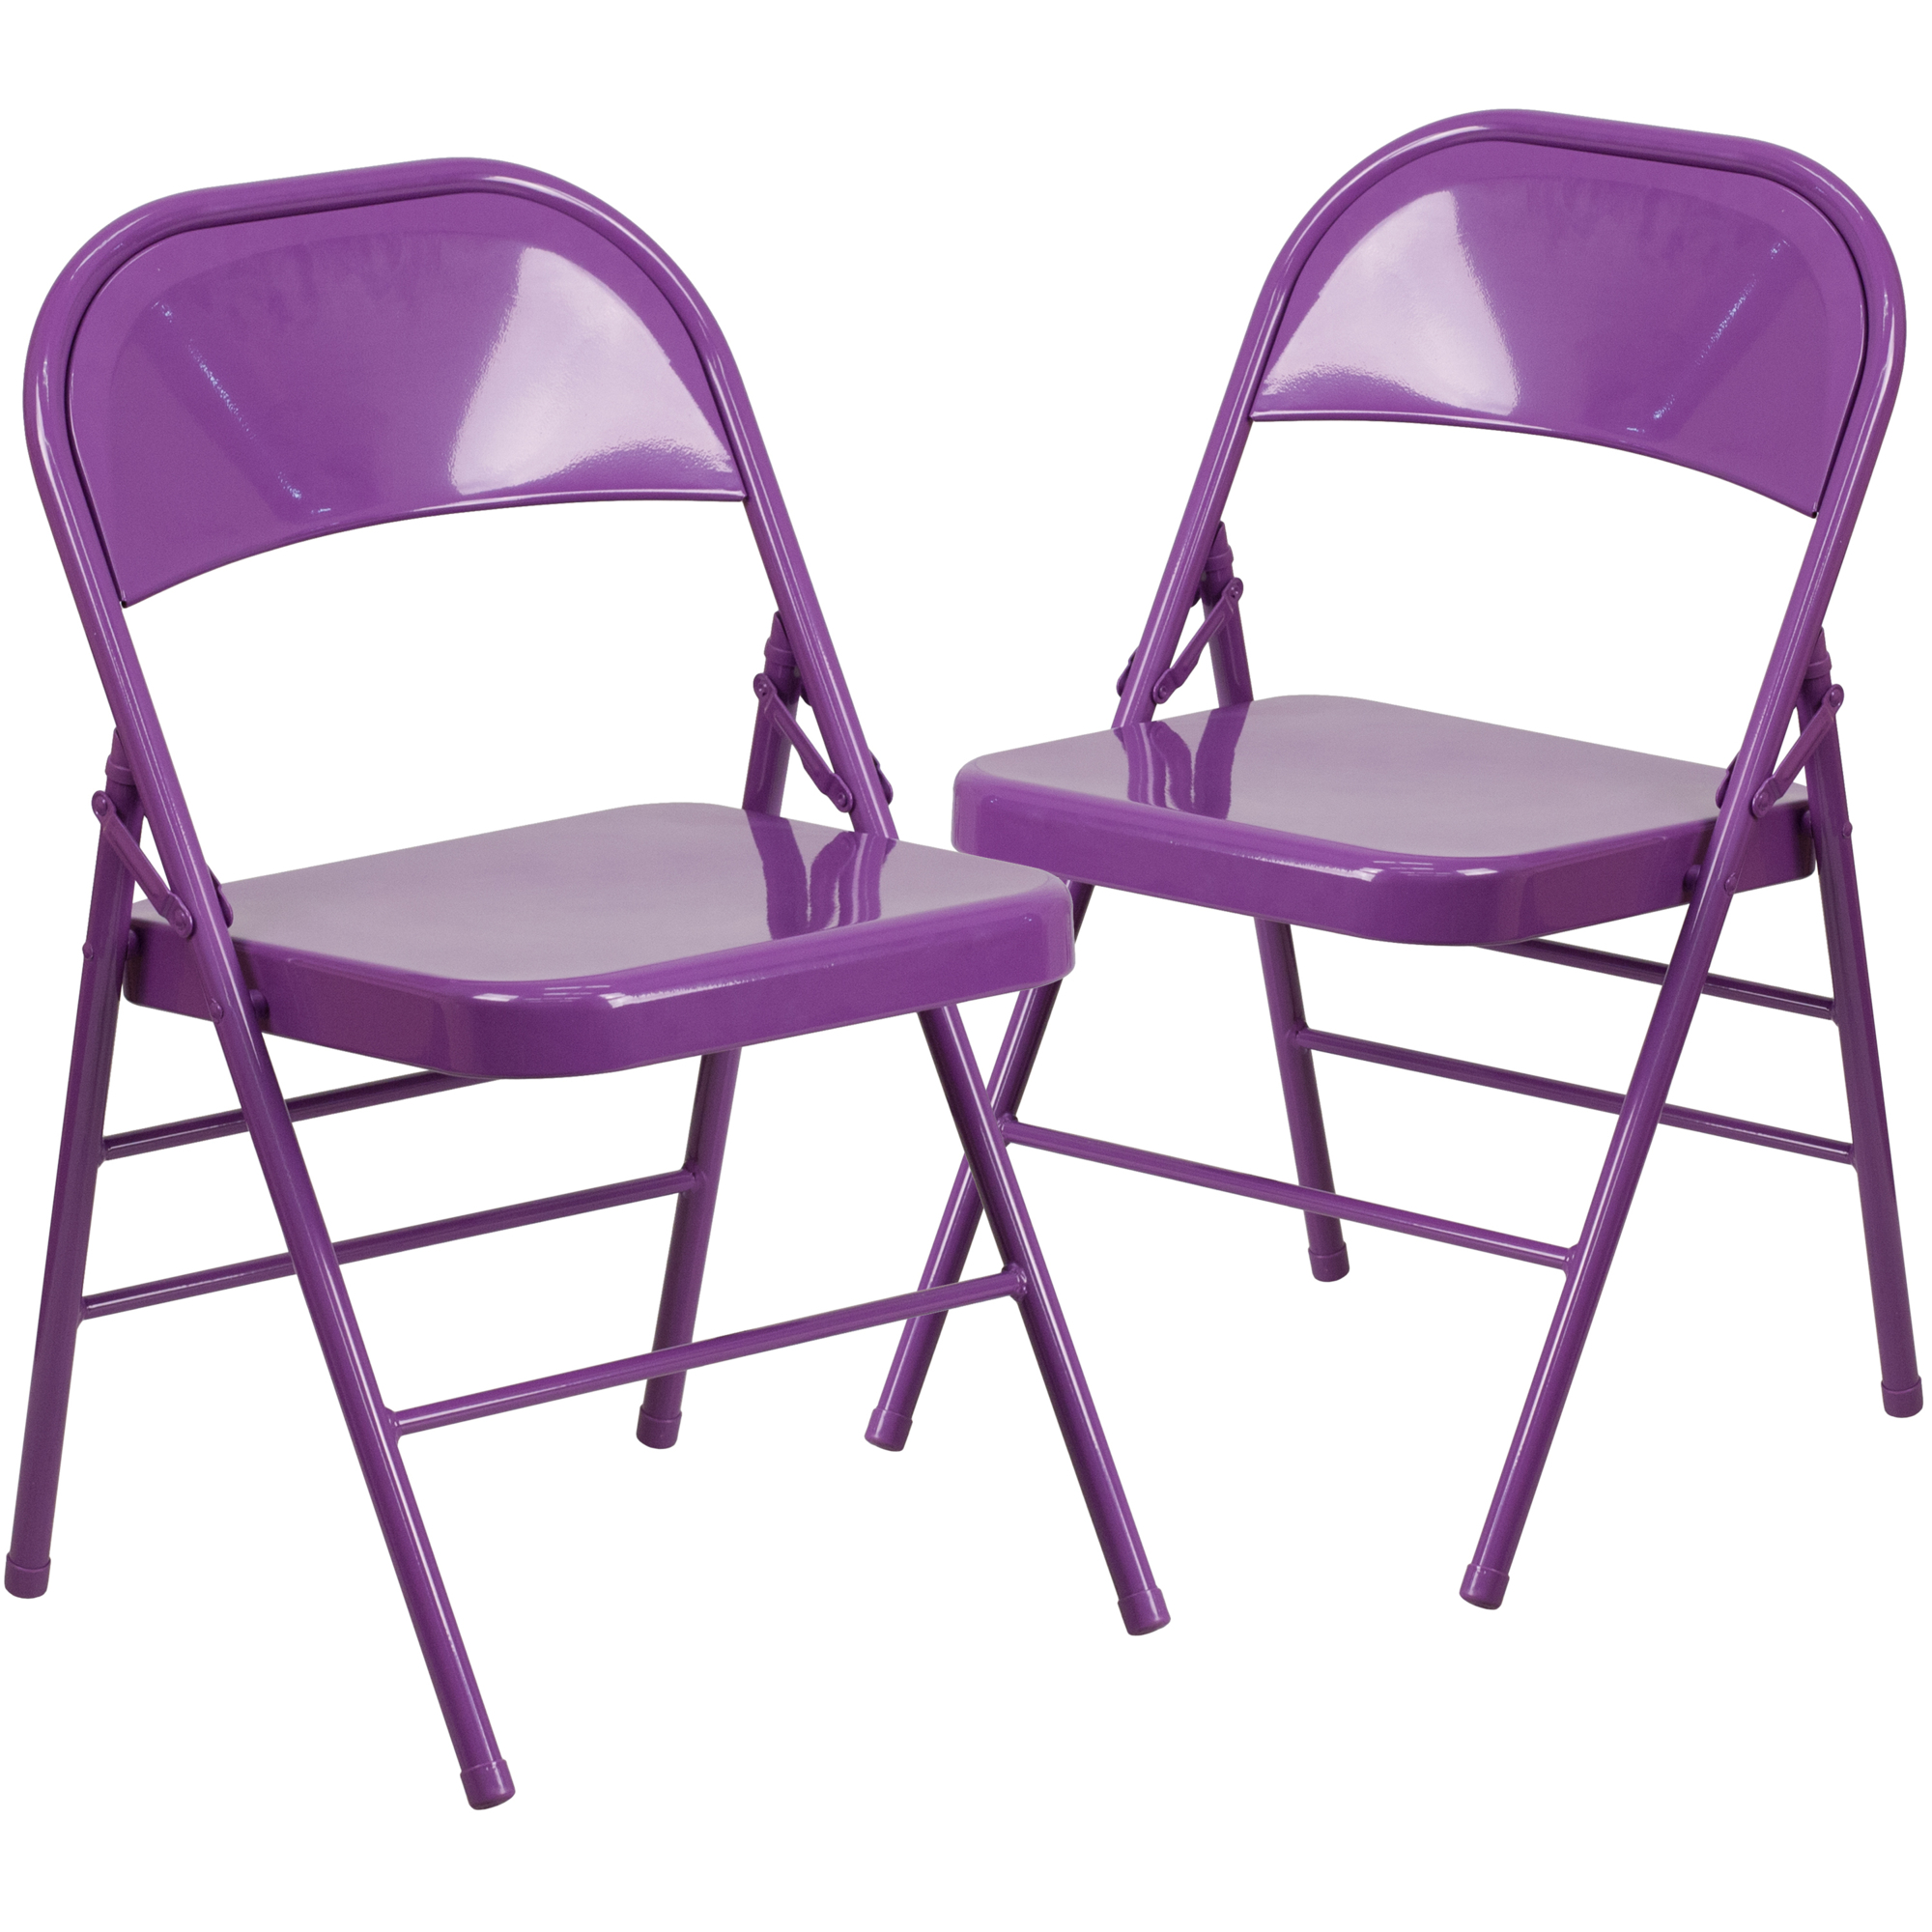 Flash Furniture, Impulsive Purple Triple Braced Metal Folding Chair, Primary Color Purple, Included (qty.) 2, Model 2HF3PUR